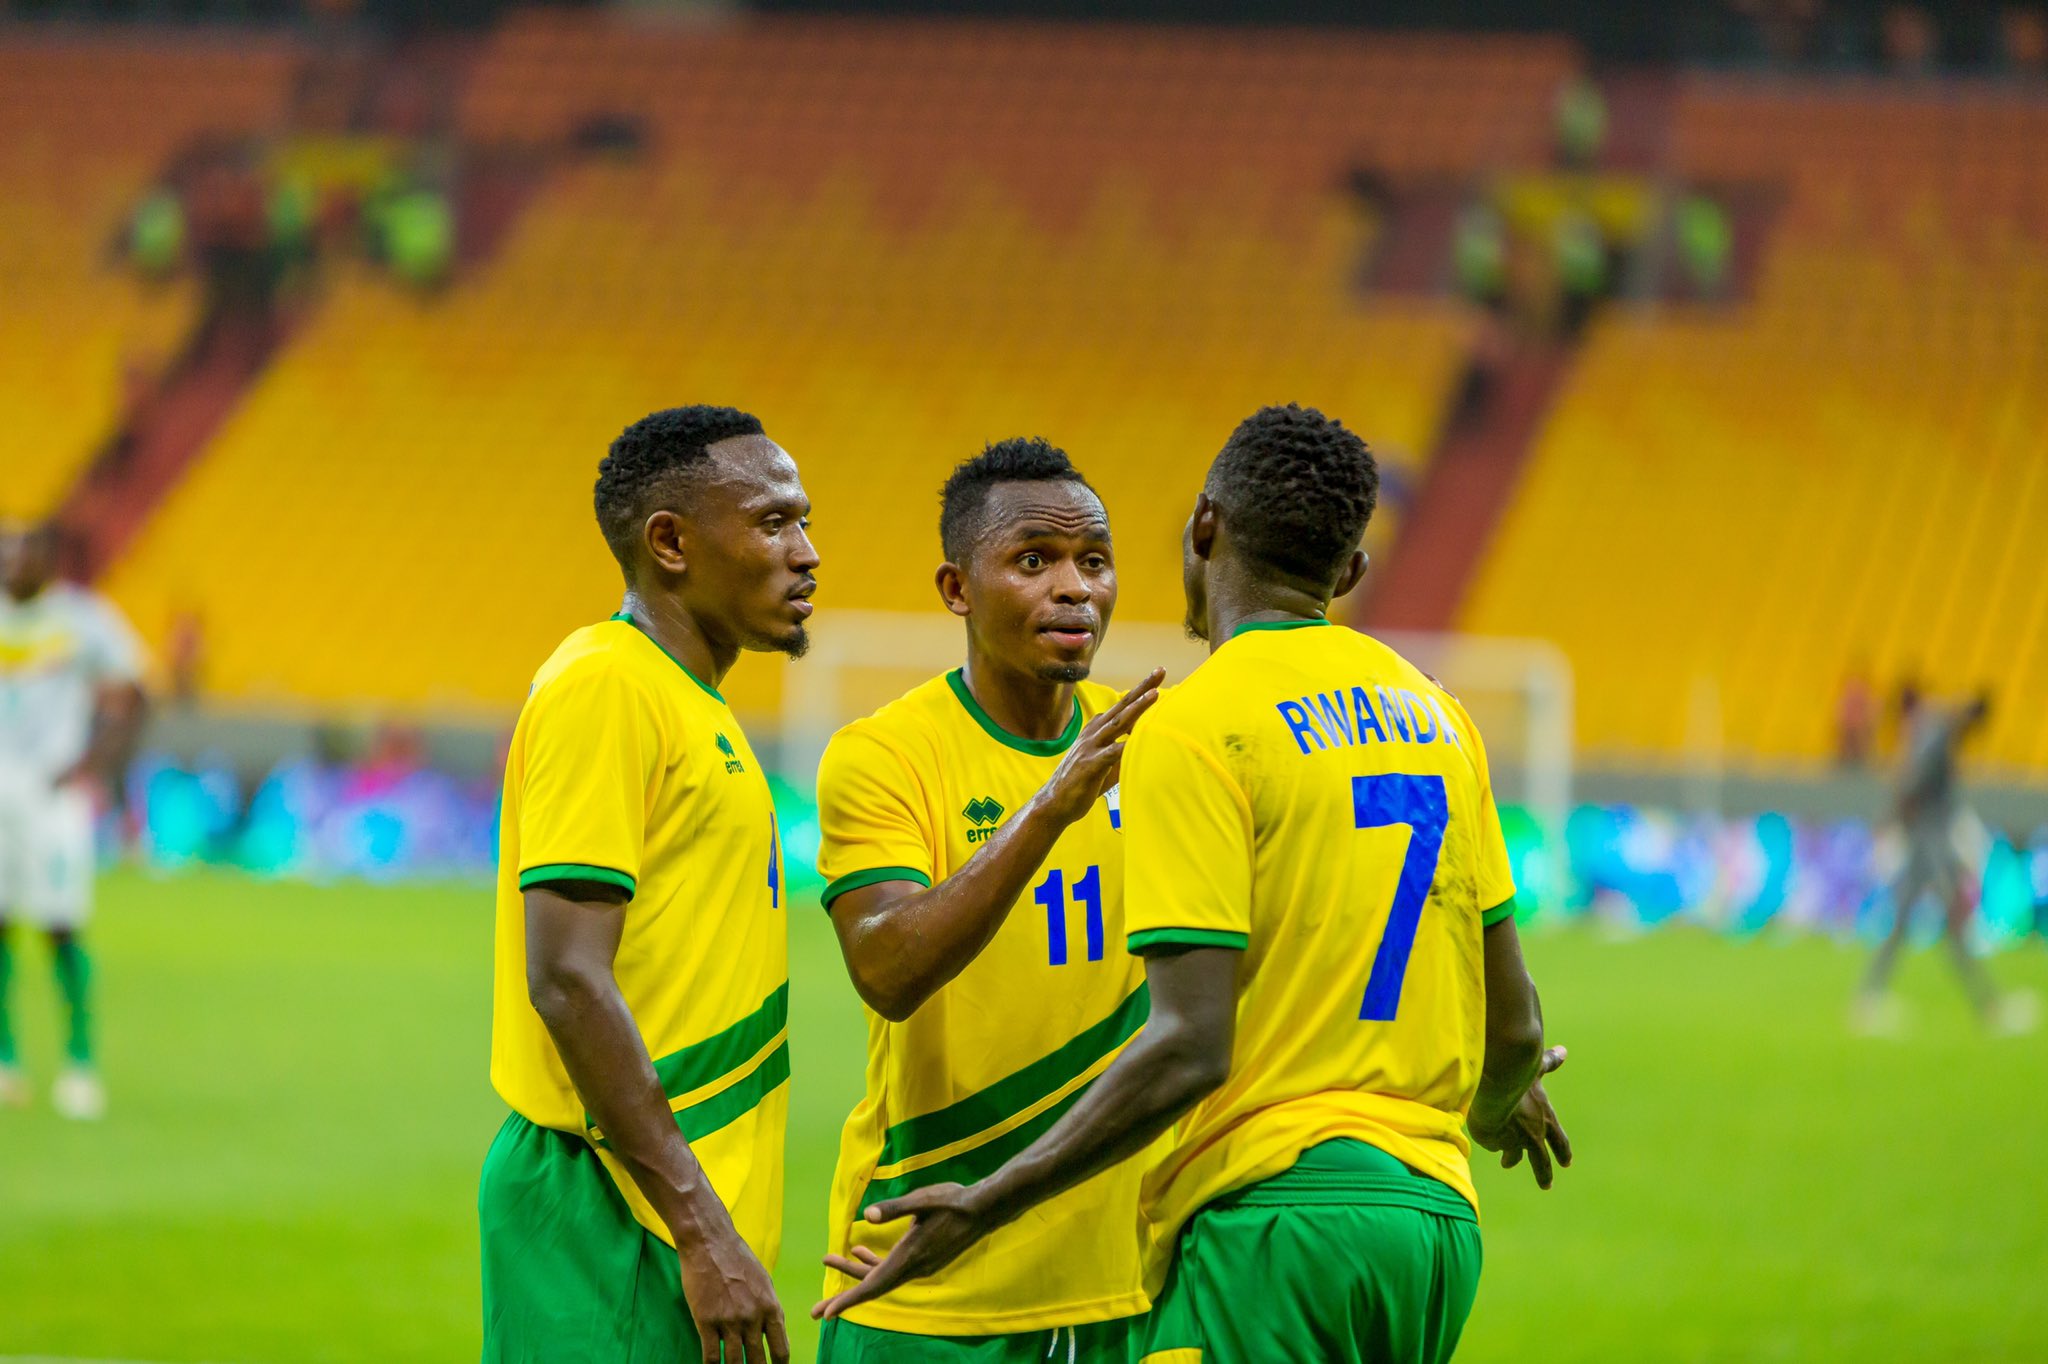 National football team midfielder Kevin Muhire (c) talks to his teammates during the match against Senegal on June 7 in Dakar.Amavubi head coach Carlos Ferrer has hailed the performance of his players despite losing 1-0. Photo: Courtesy.